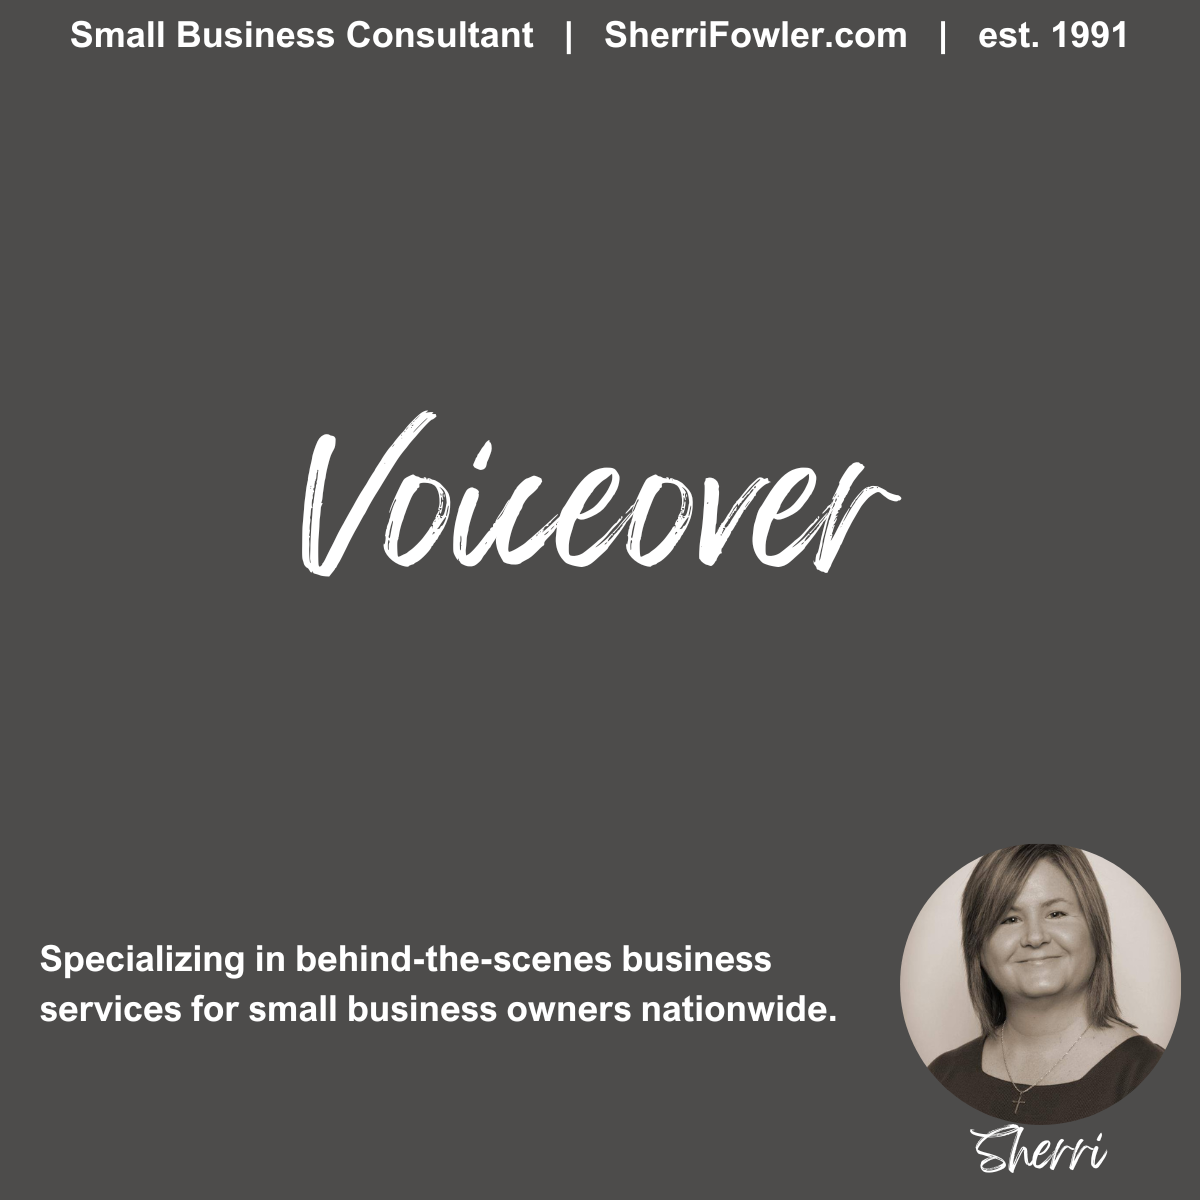 Voiceover Service for small business owners and nonprofits is available through SherriFowler.com